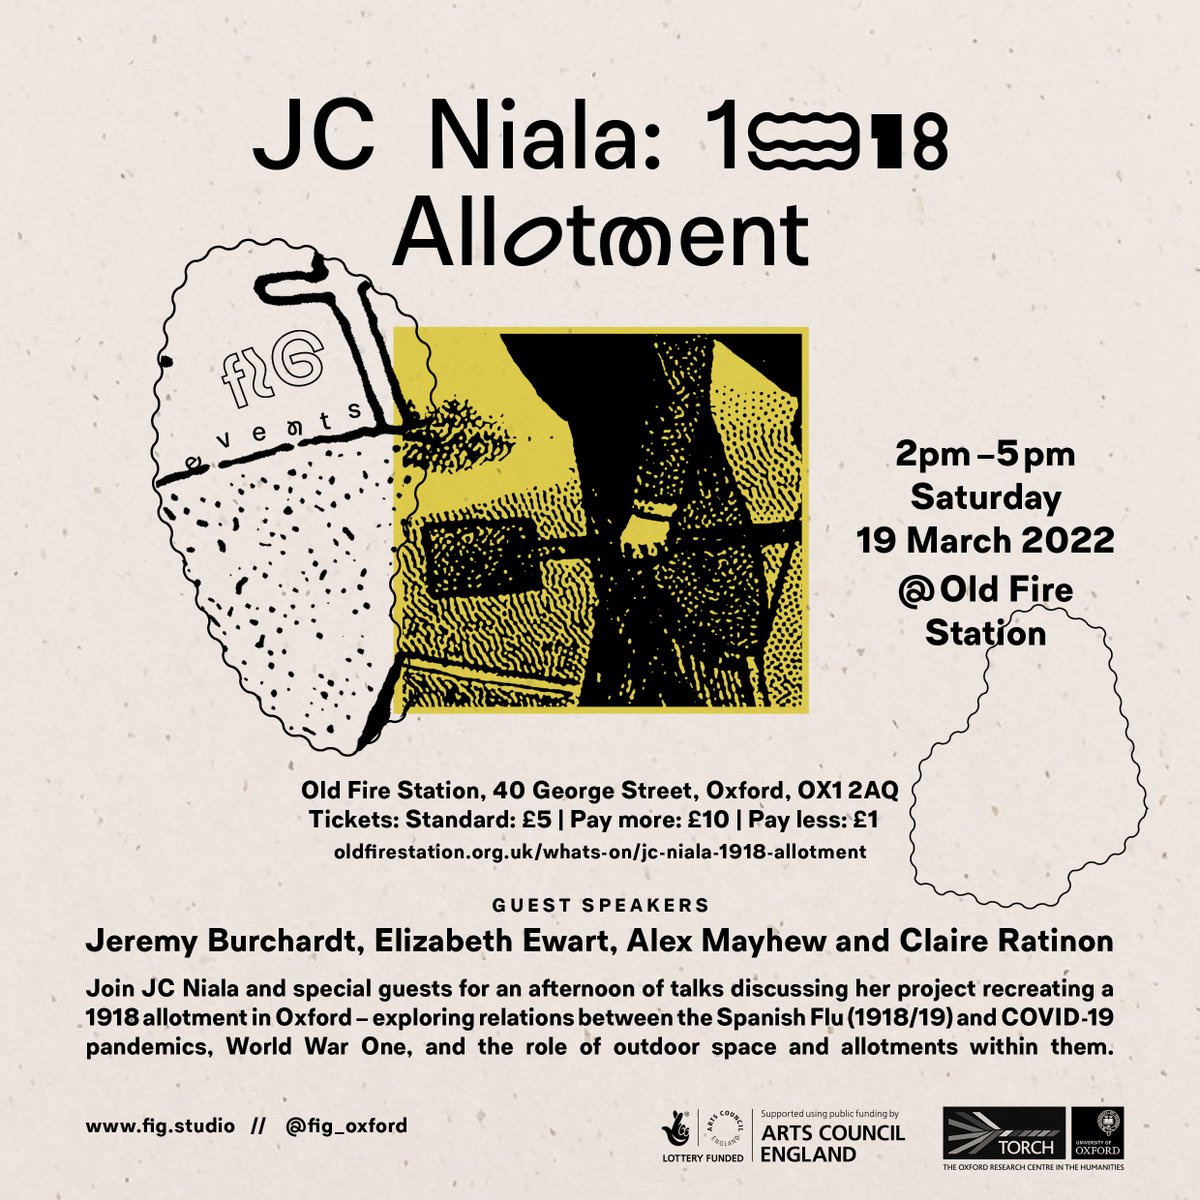 Few tickets still available for @jcniala 's event tmrw! oldfirestation.org.uk/whats-on/jc-ni… 
Also live-streamed on @TORCHOxford 's Youtube channel 2-5pm youtube.com/watch?v=UQgYTb…
Speakers include: @AlexCMayhew @claireratinon 
Spread the word! @ArtsatOFS @TheMERL @OllieDouglas @FusionArtsOx